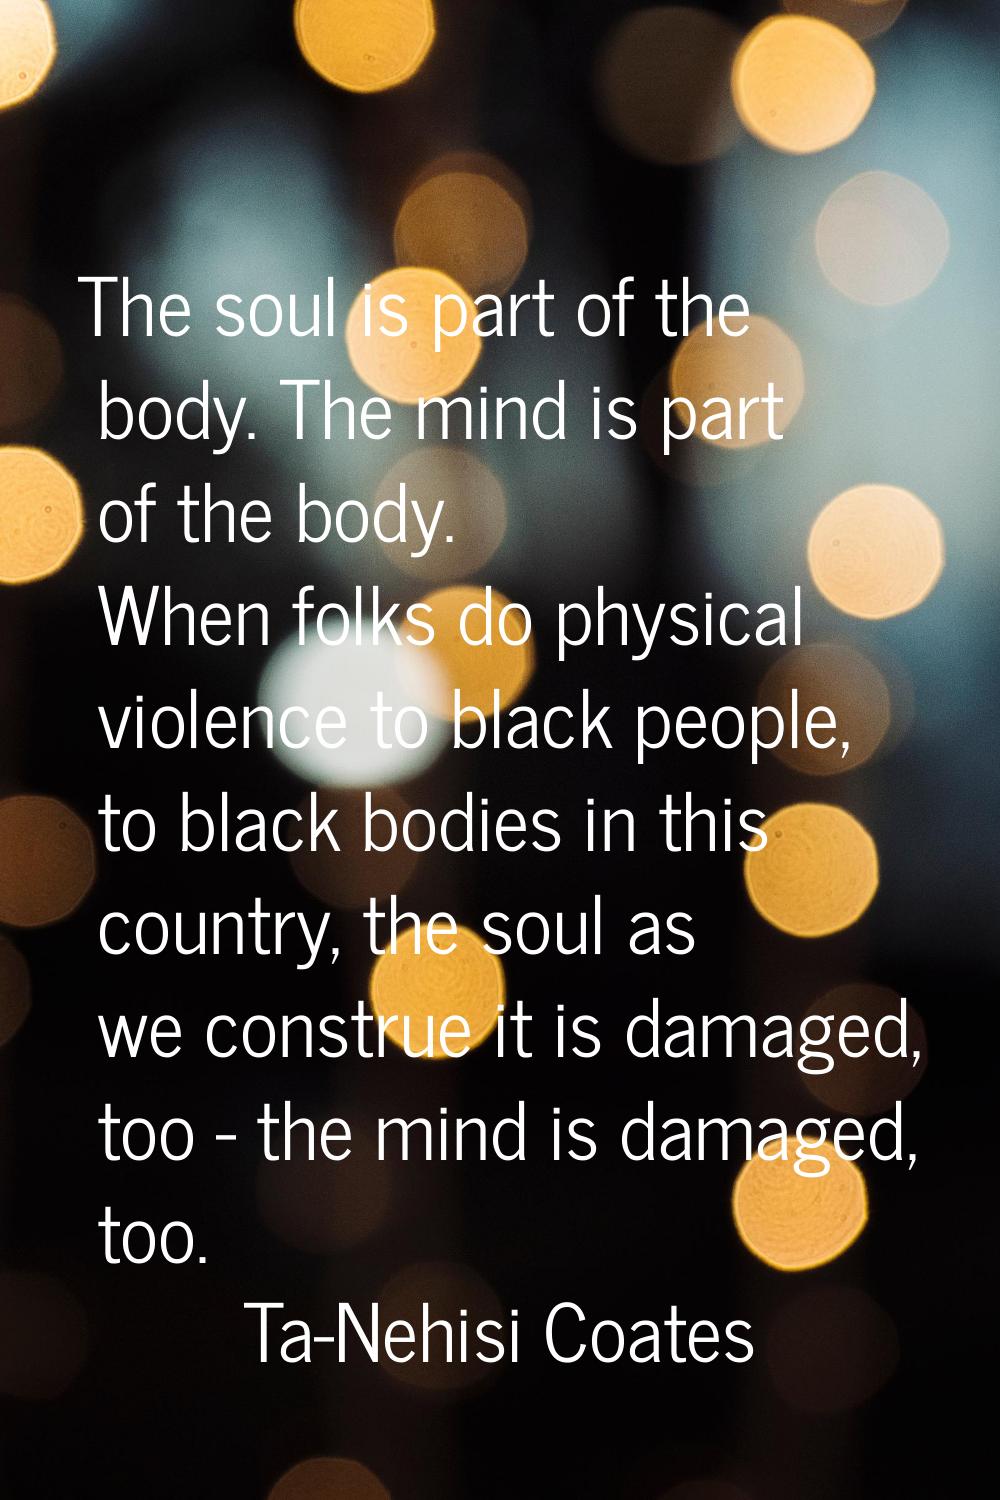 The soul is part of the body. The mind is part of the body. When folks do physical violence to blac